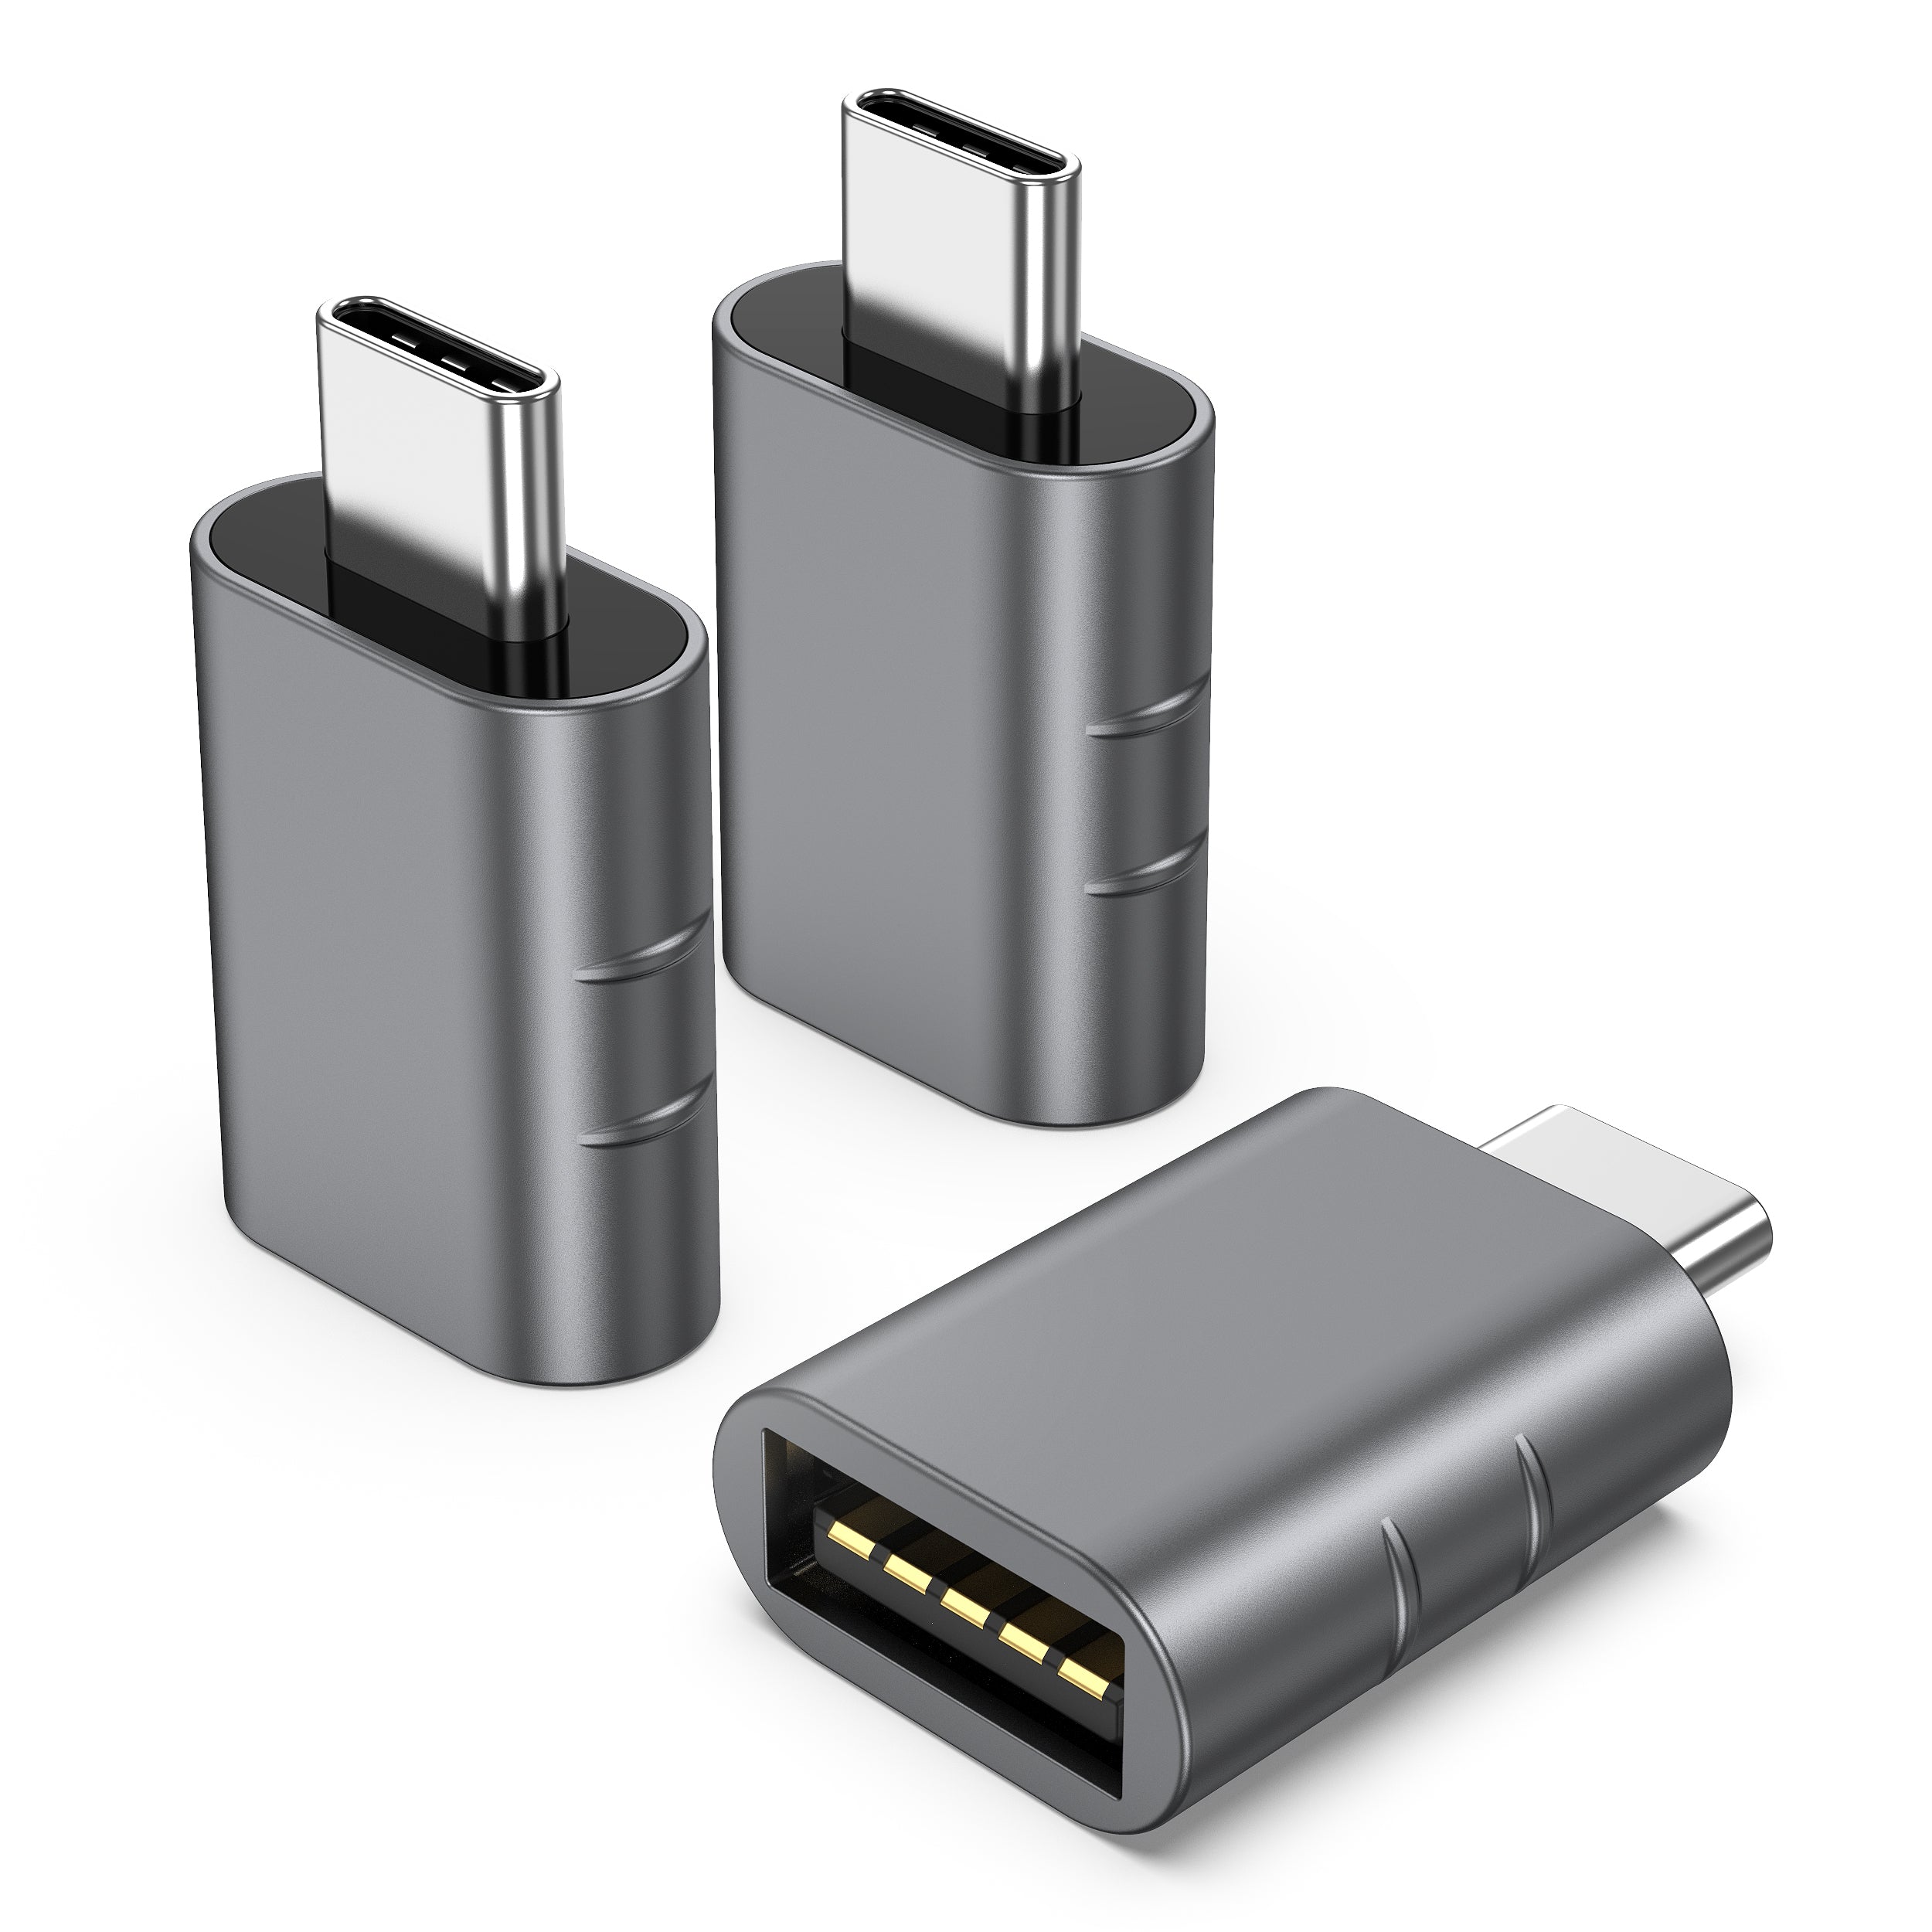 2 USB C Male to USB3 Female Adapter